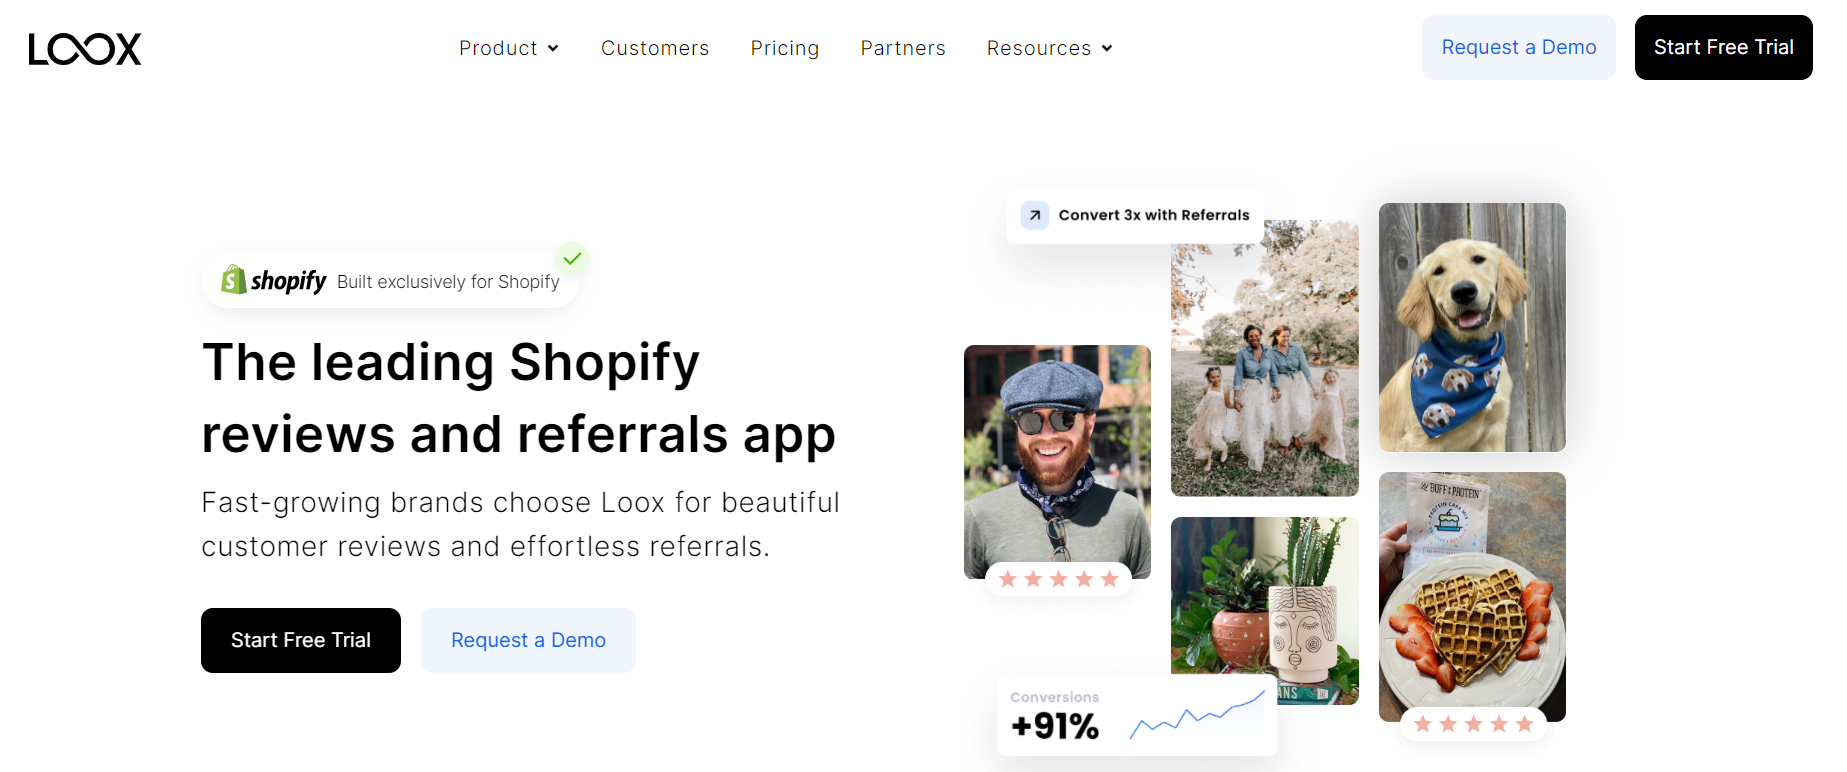 Loox reviews: The leading Shopify reviews and referrals app